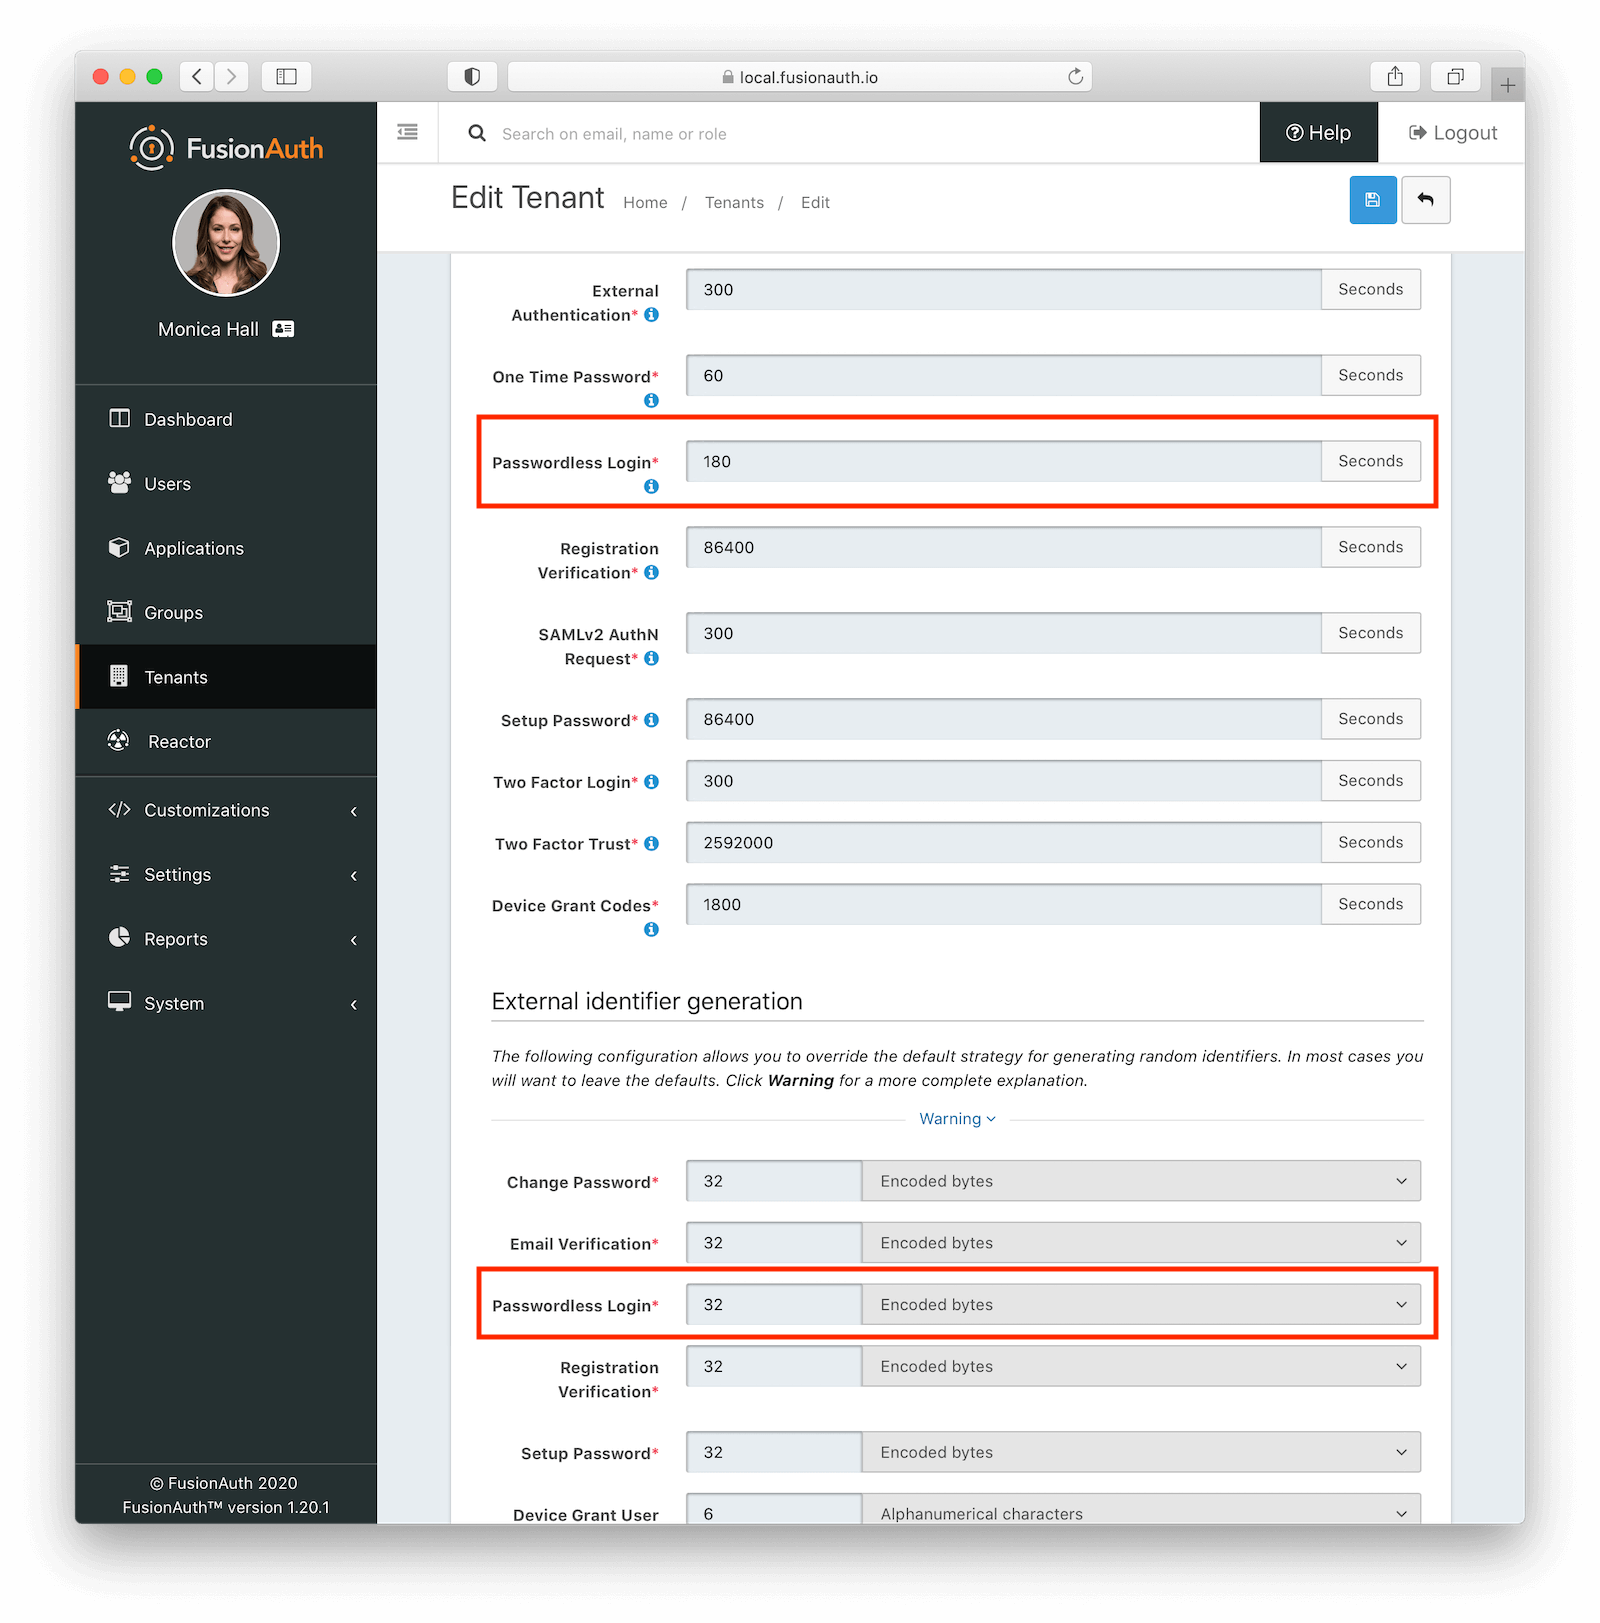 The tenant settings to customize code lifetime and generation strategy.